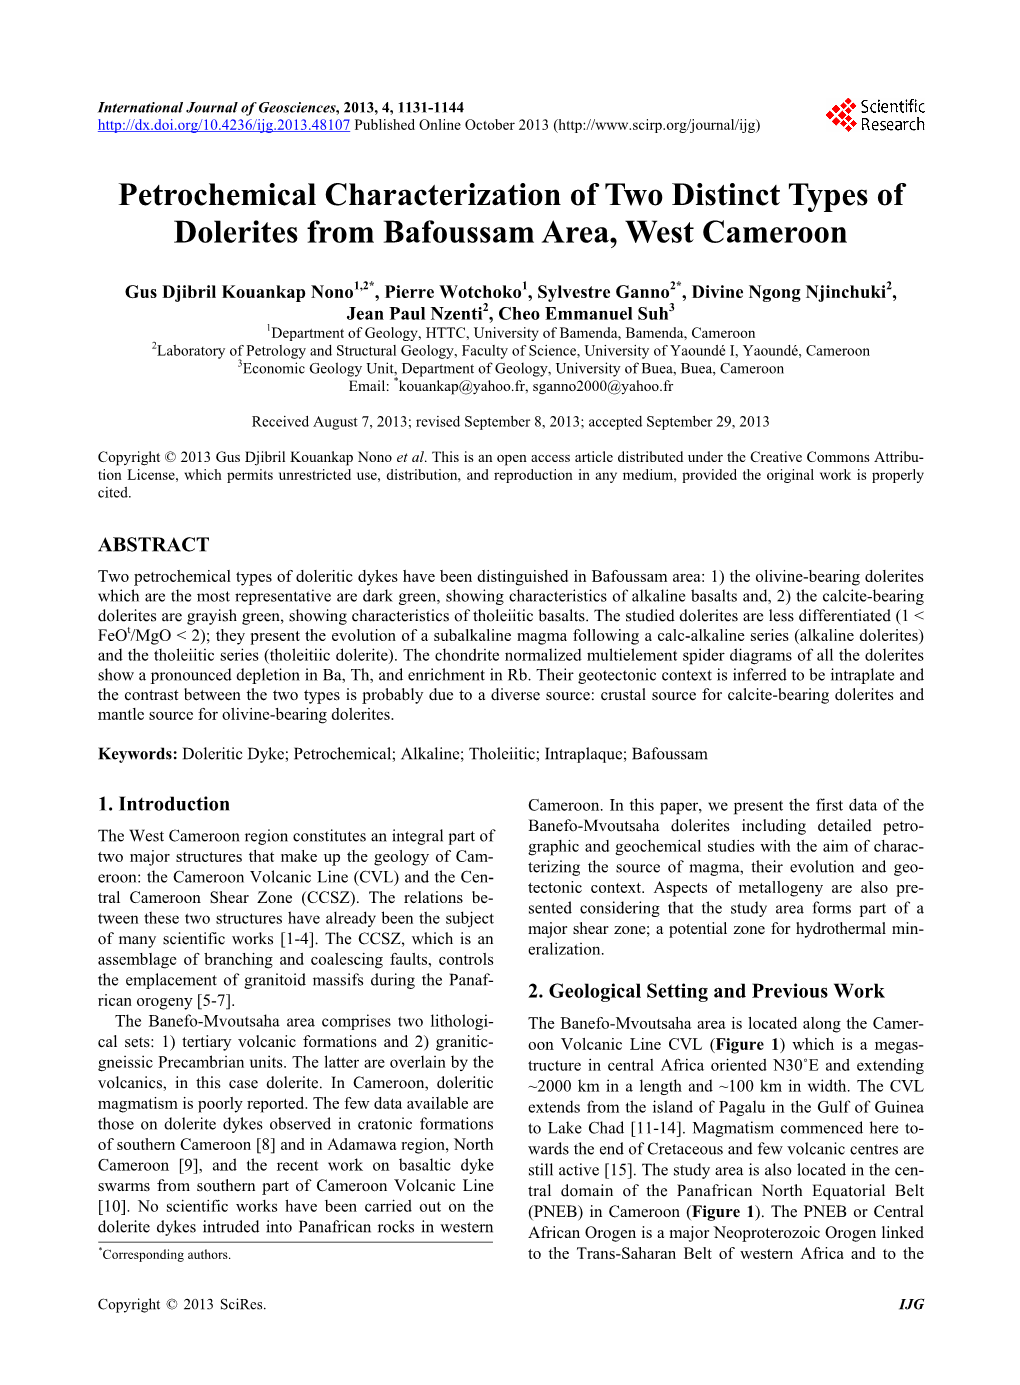 Petrochemical Characterization of Two Distinct Types of Dolerites from Bafoussam Area, West Cameroon